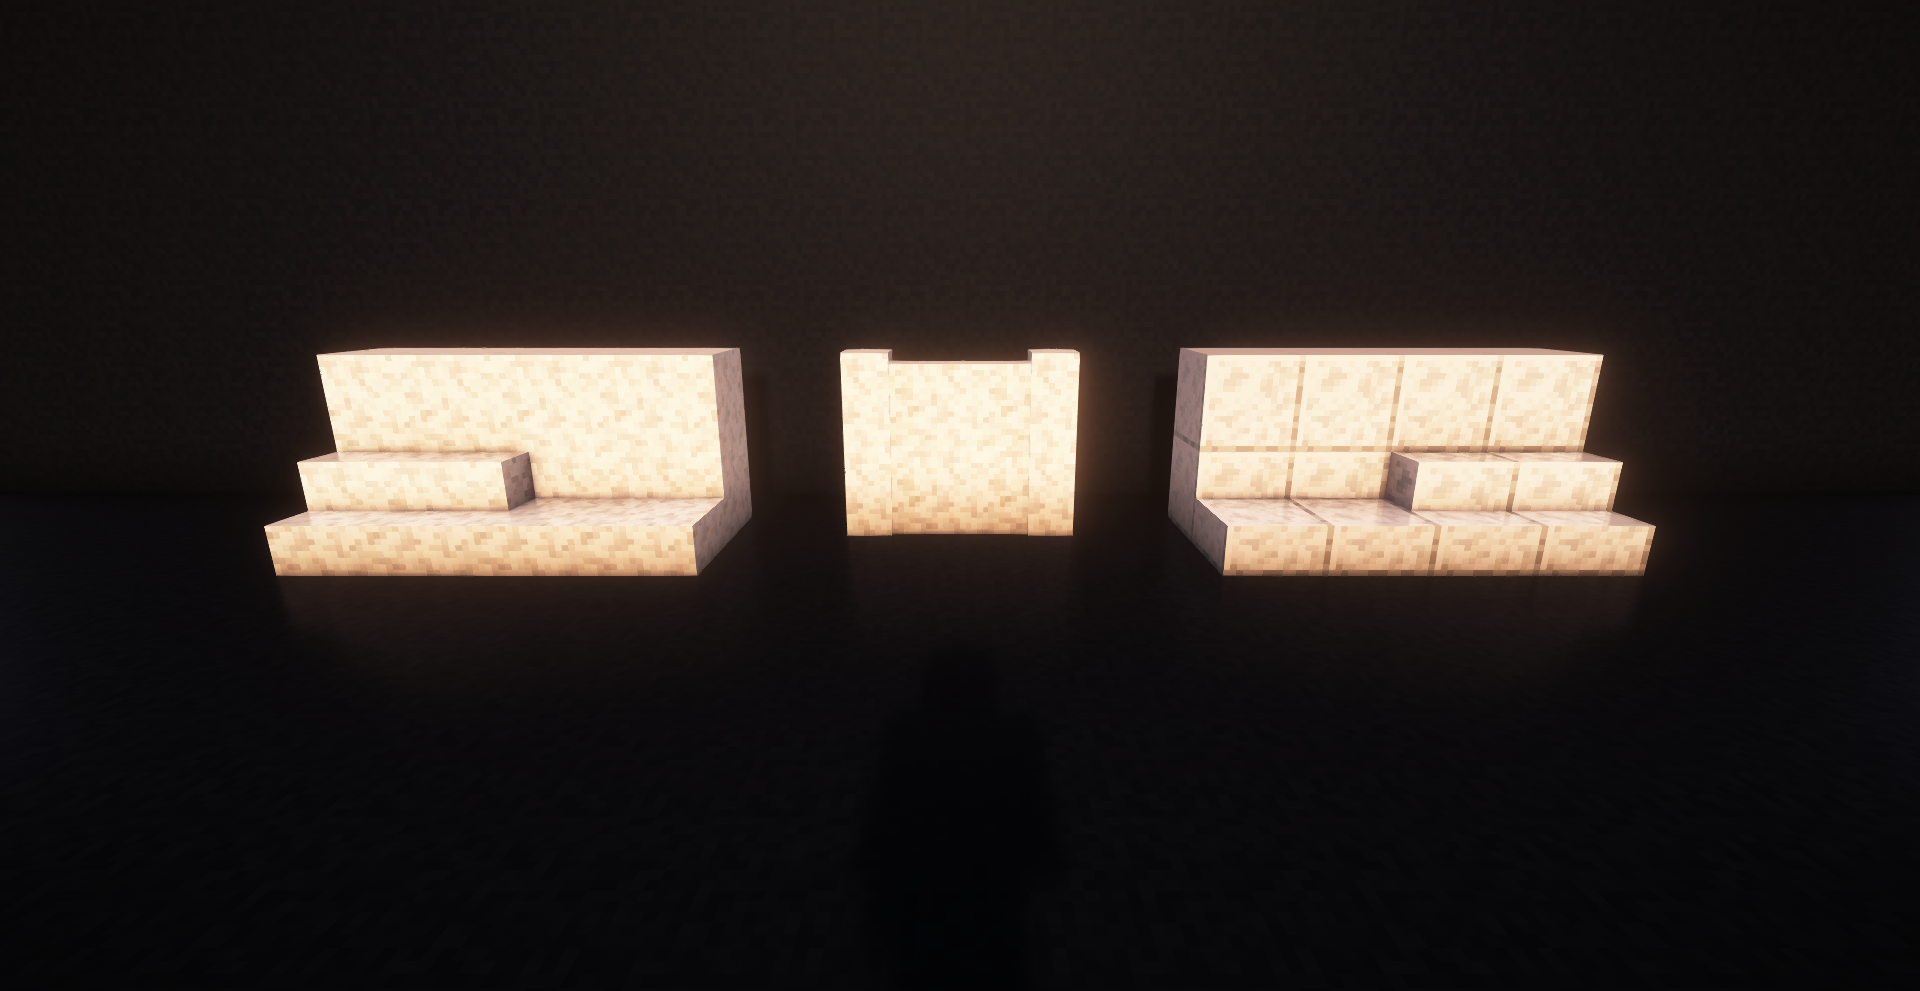 With Shaders